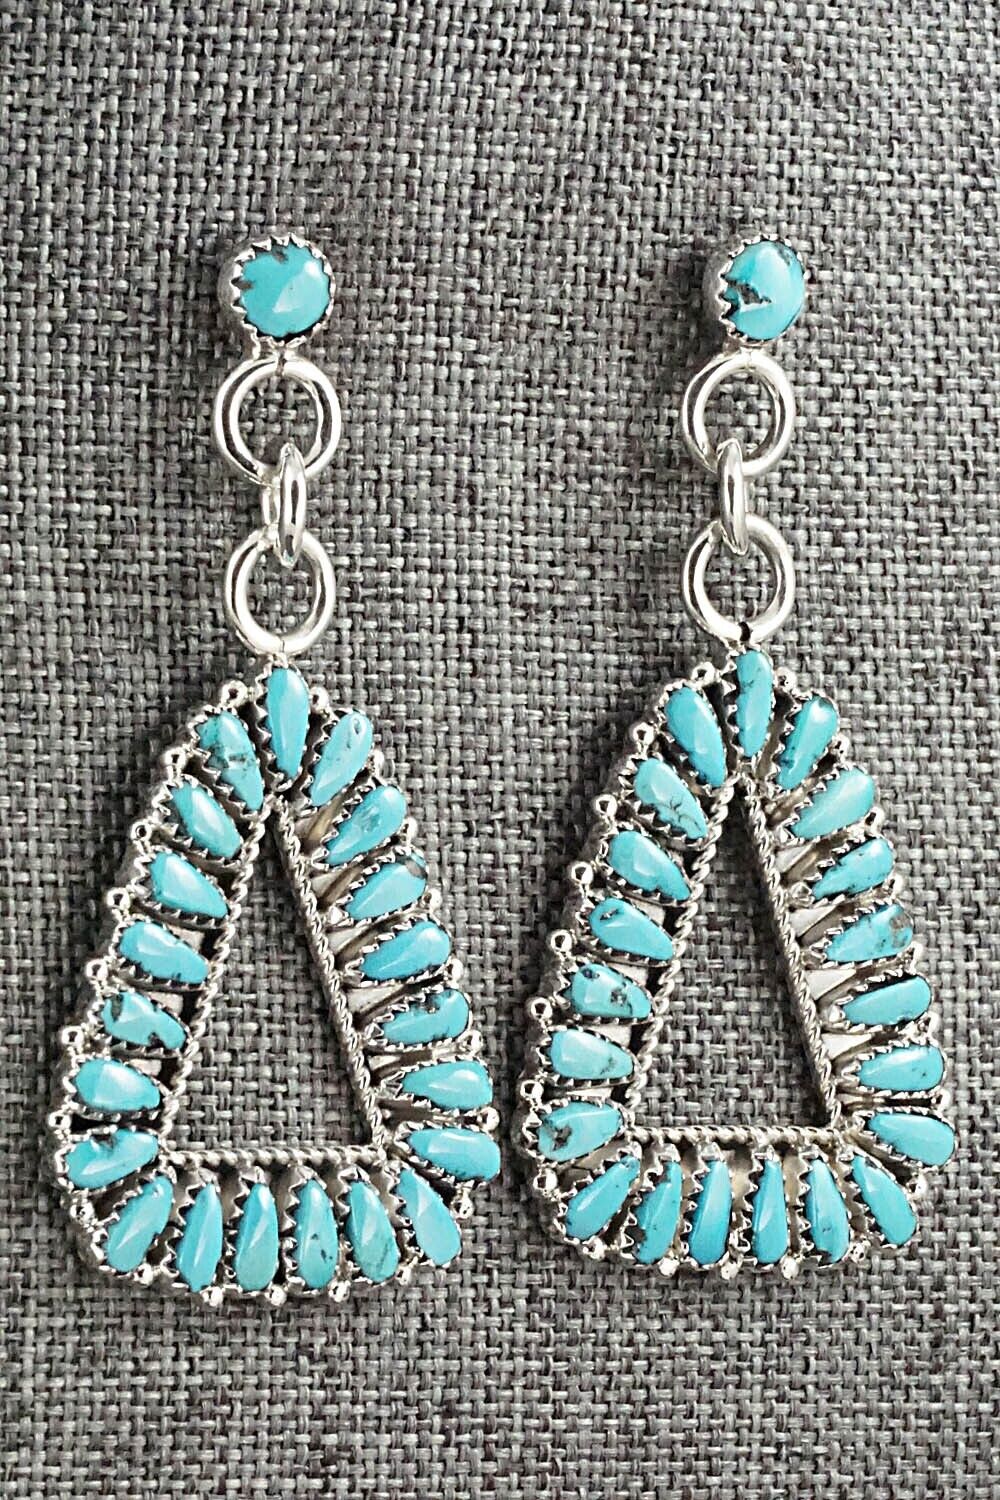 Turquoise & Sterling Silver Earrings - Sarphine Wilson